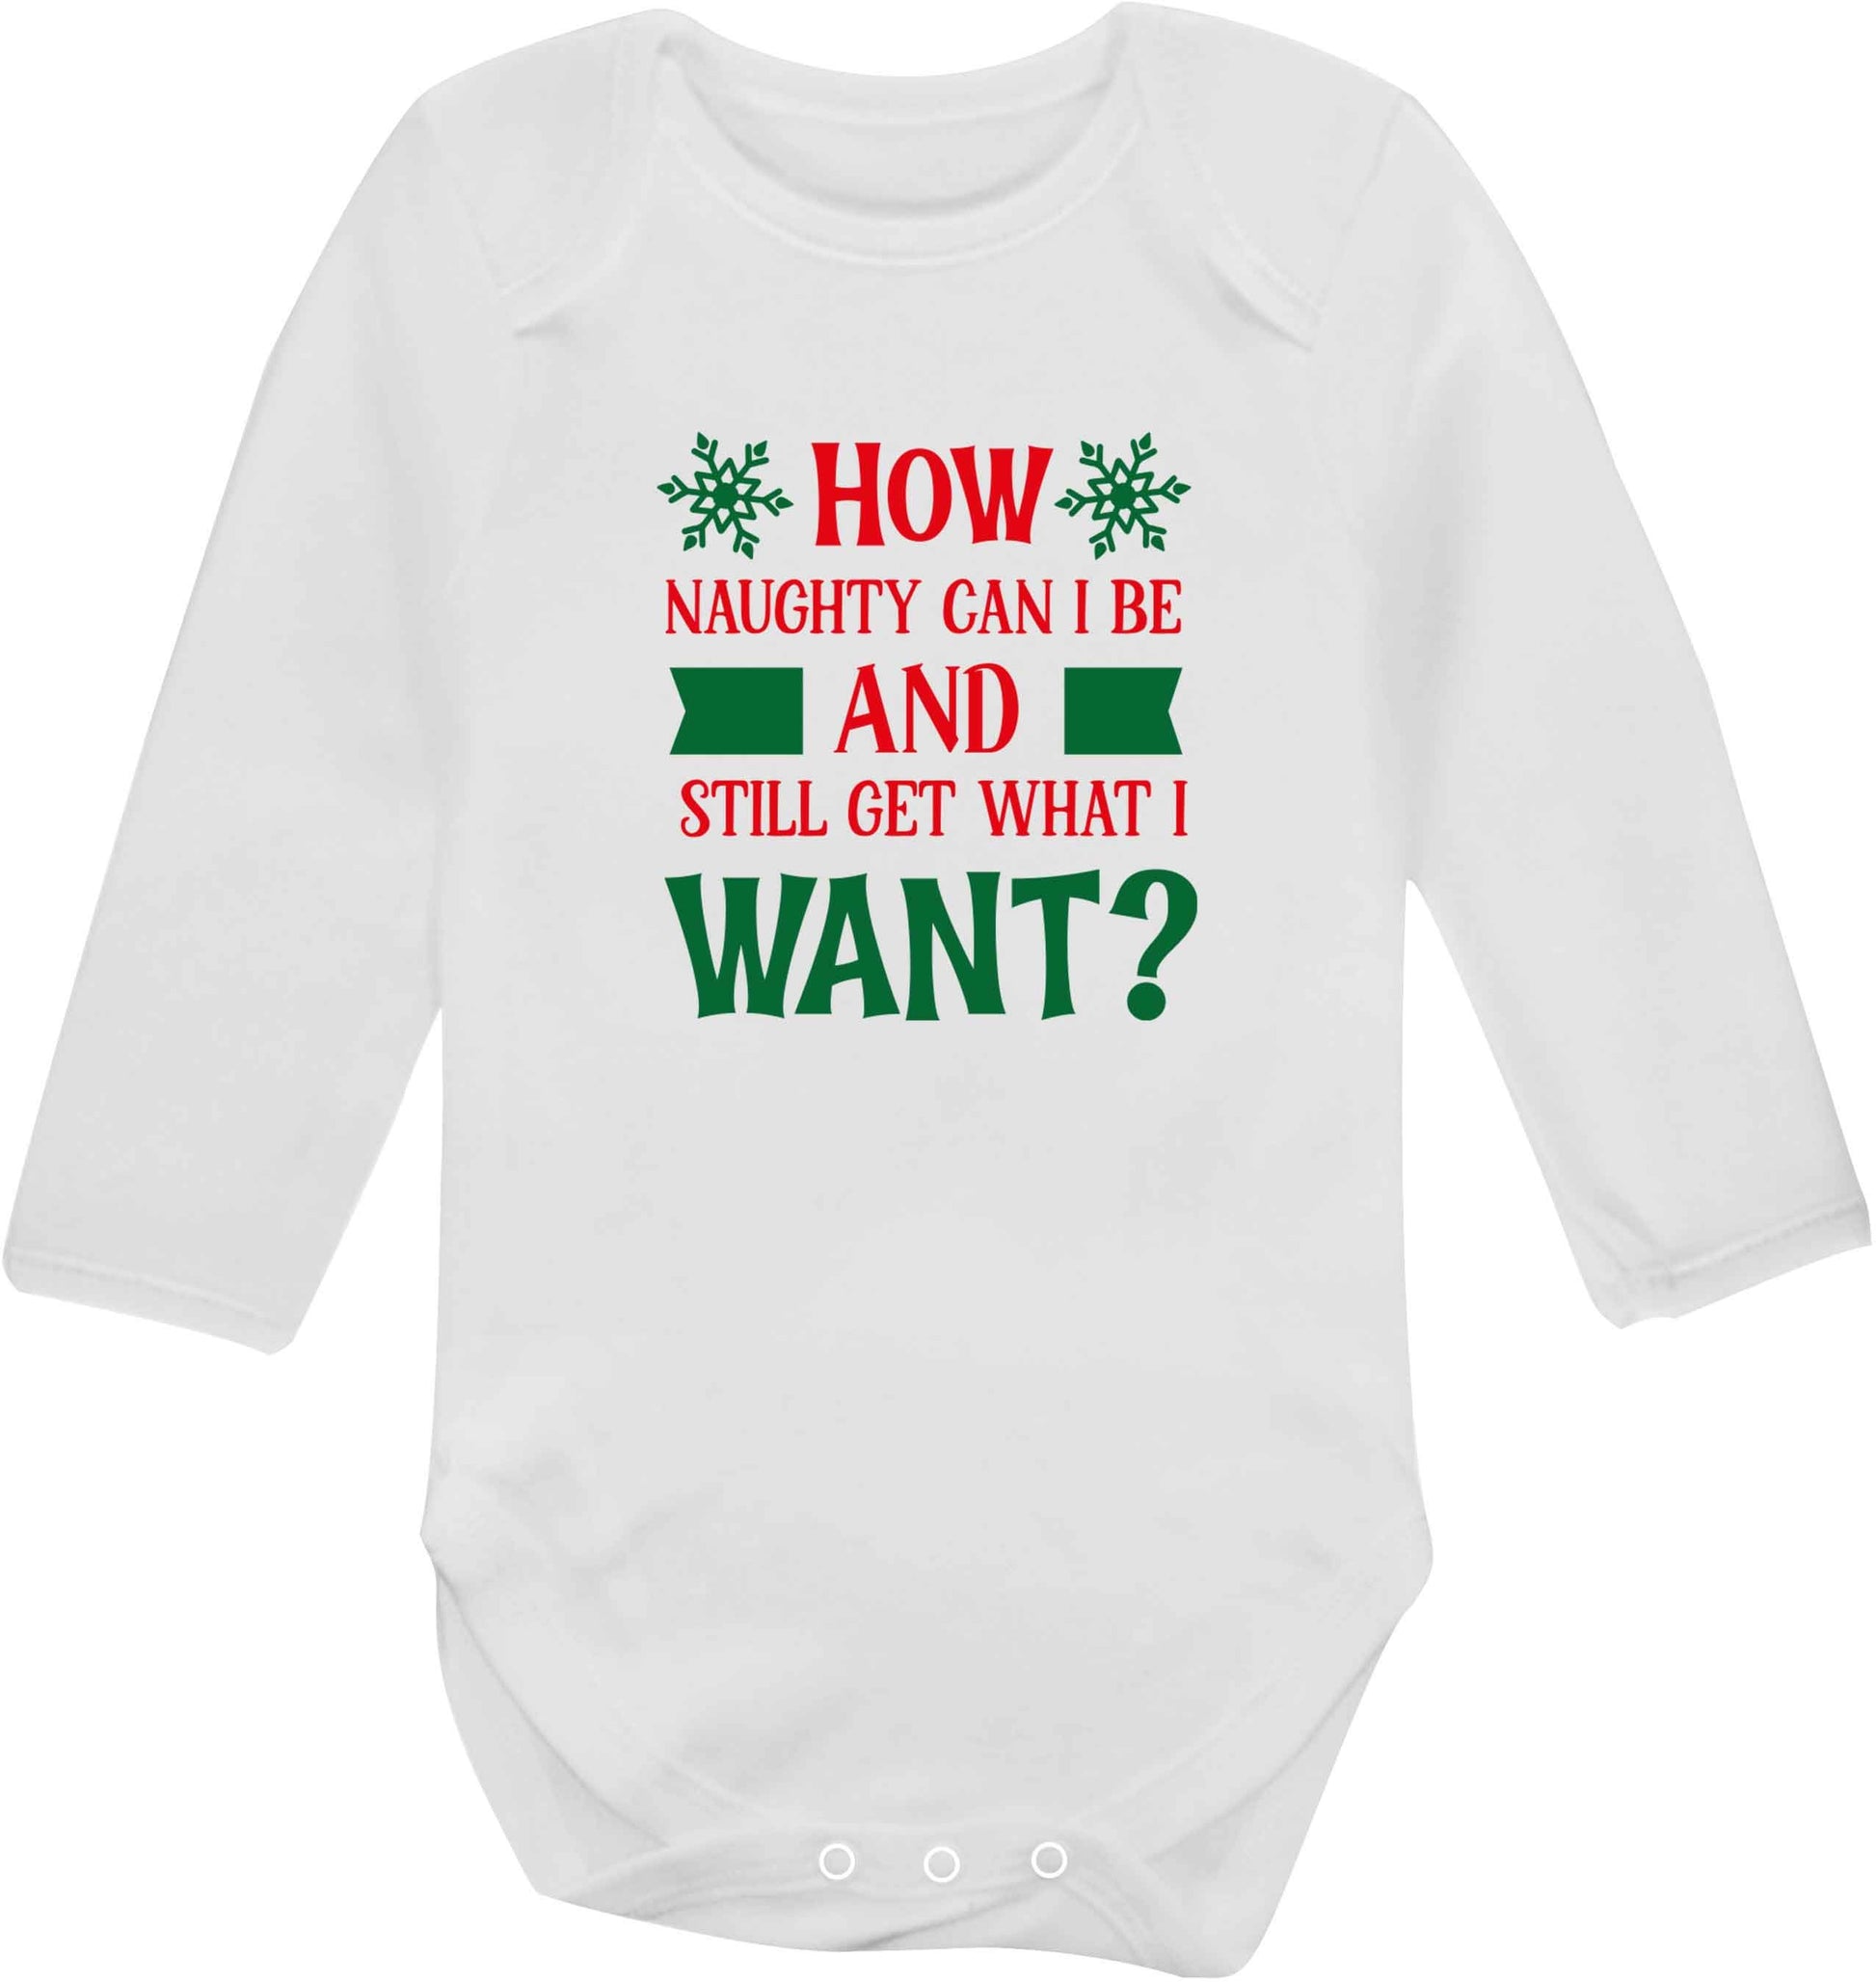 How naughty can I be and still get what I want? baby vest long sleeved white 6-12 months